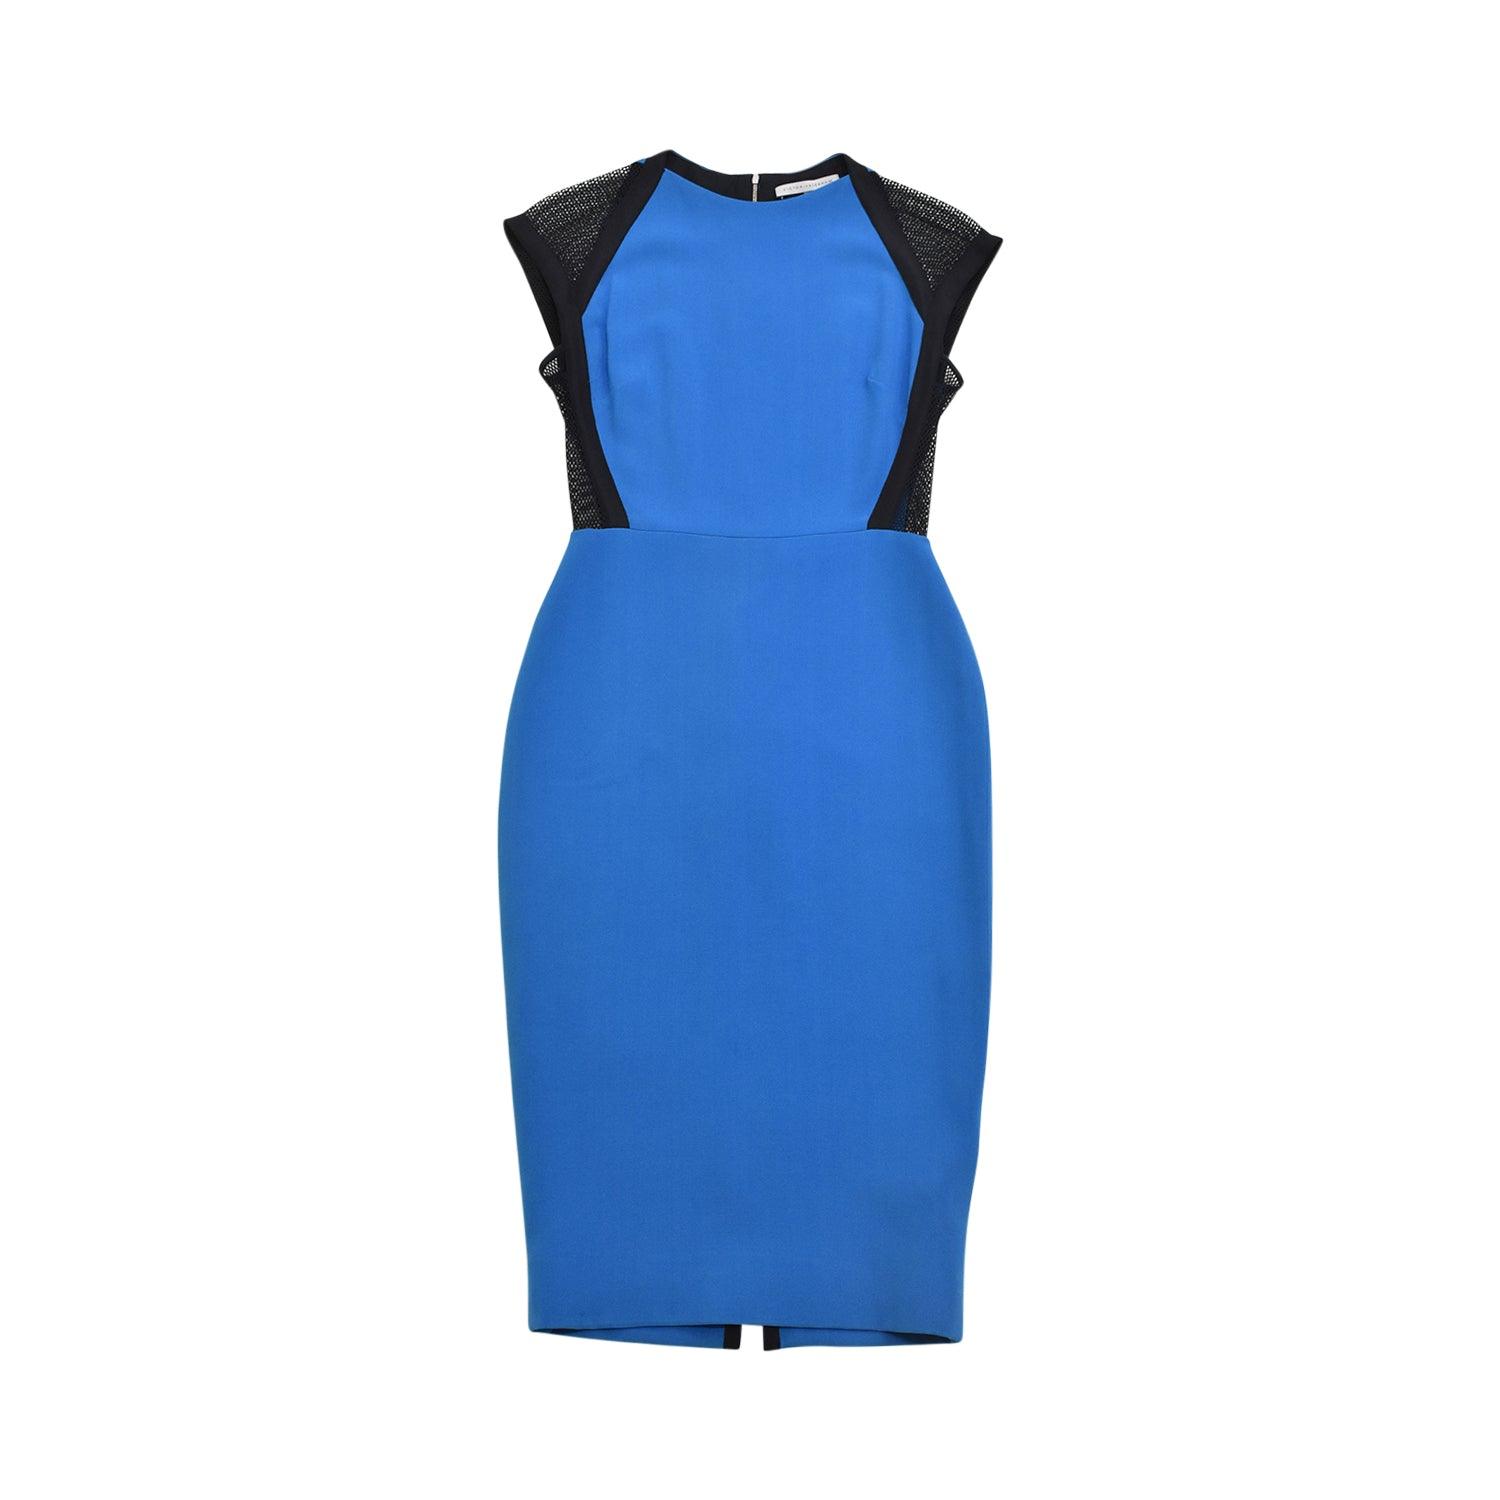 Victoria Beckham Dress - Women's 6 - Fashionably Yours